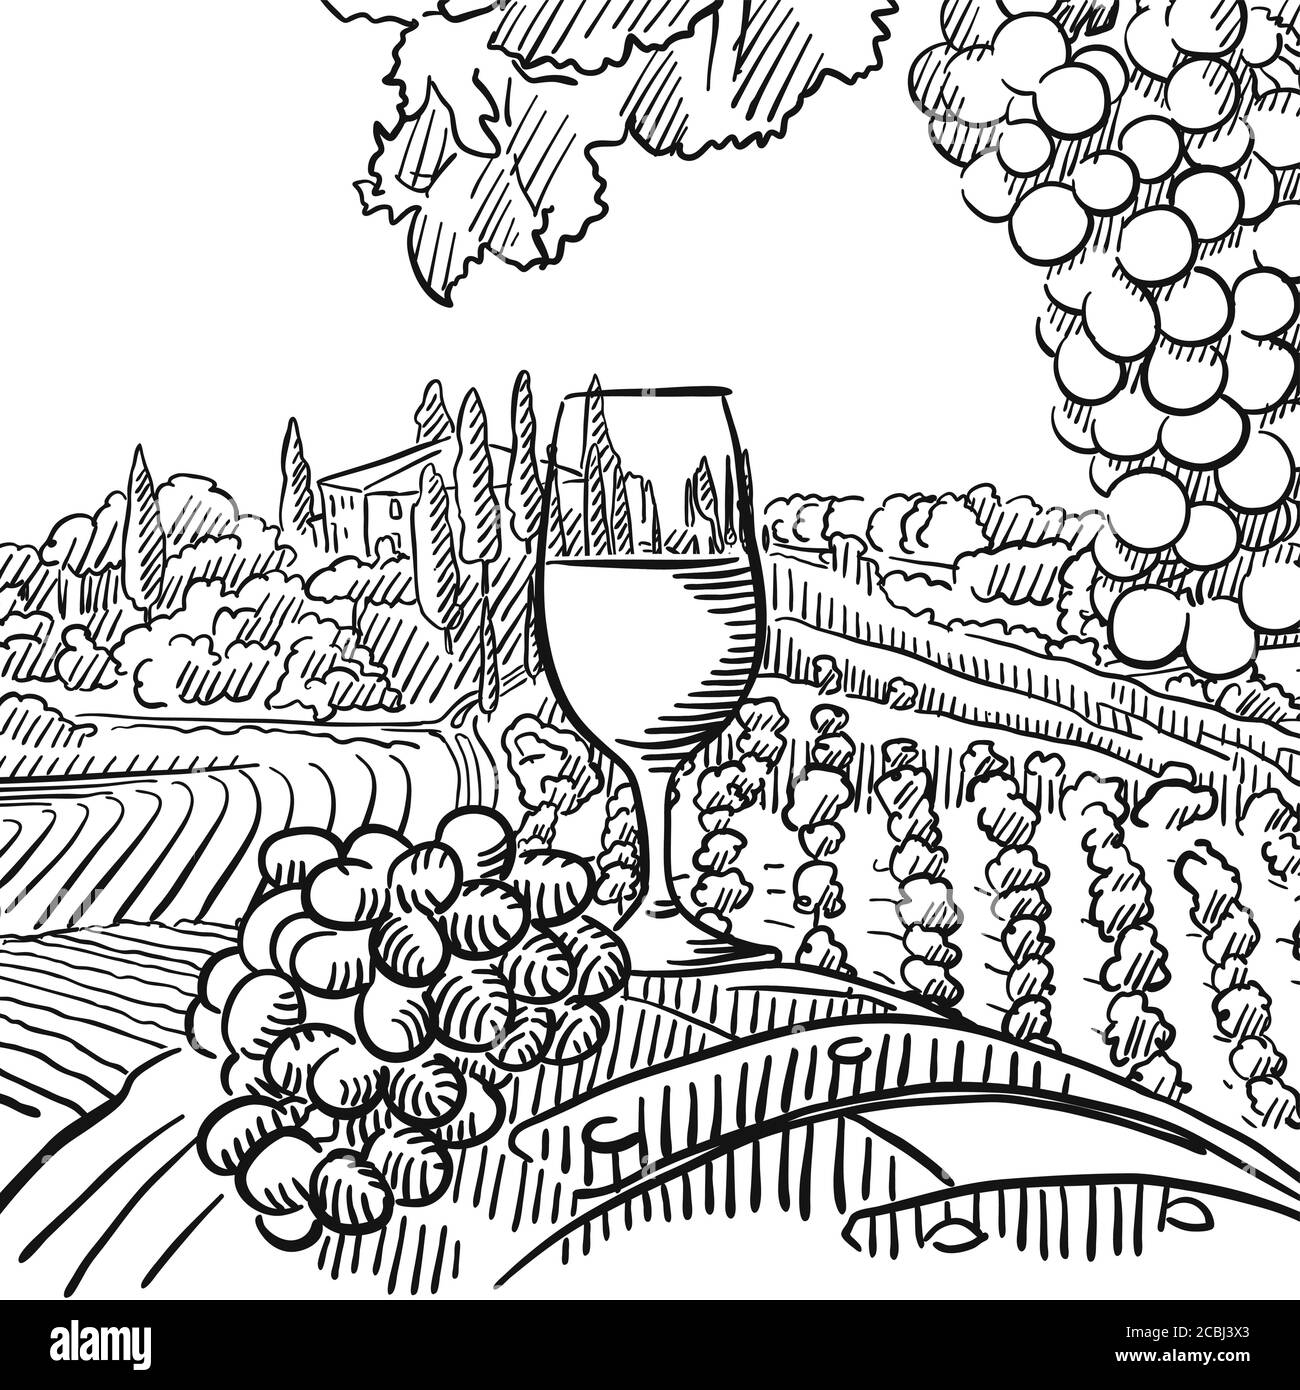 Vineyard scene compostition. Black and white hand drawn illustration. Icon sign for print and labelling. Stock Vector